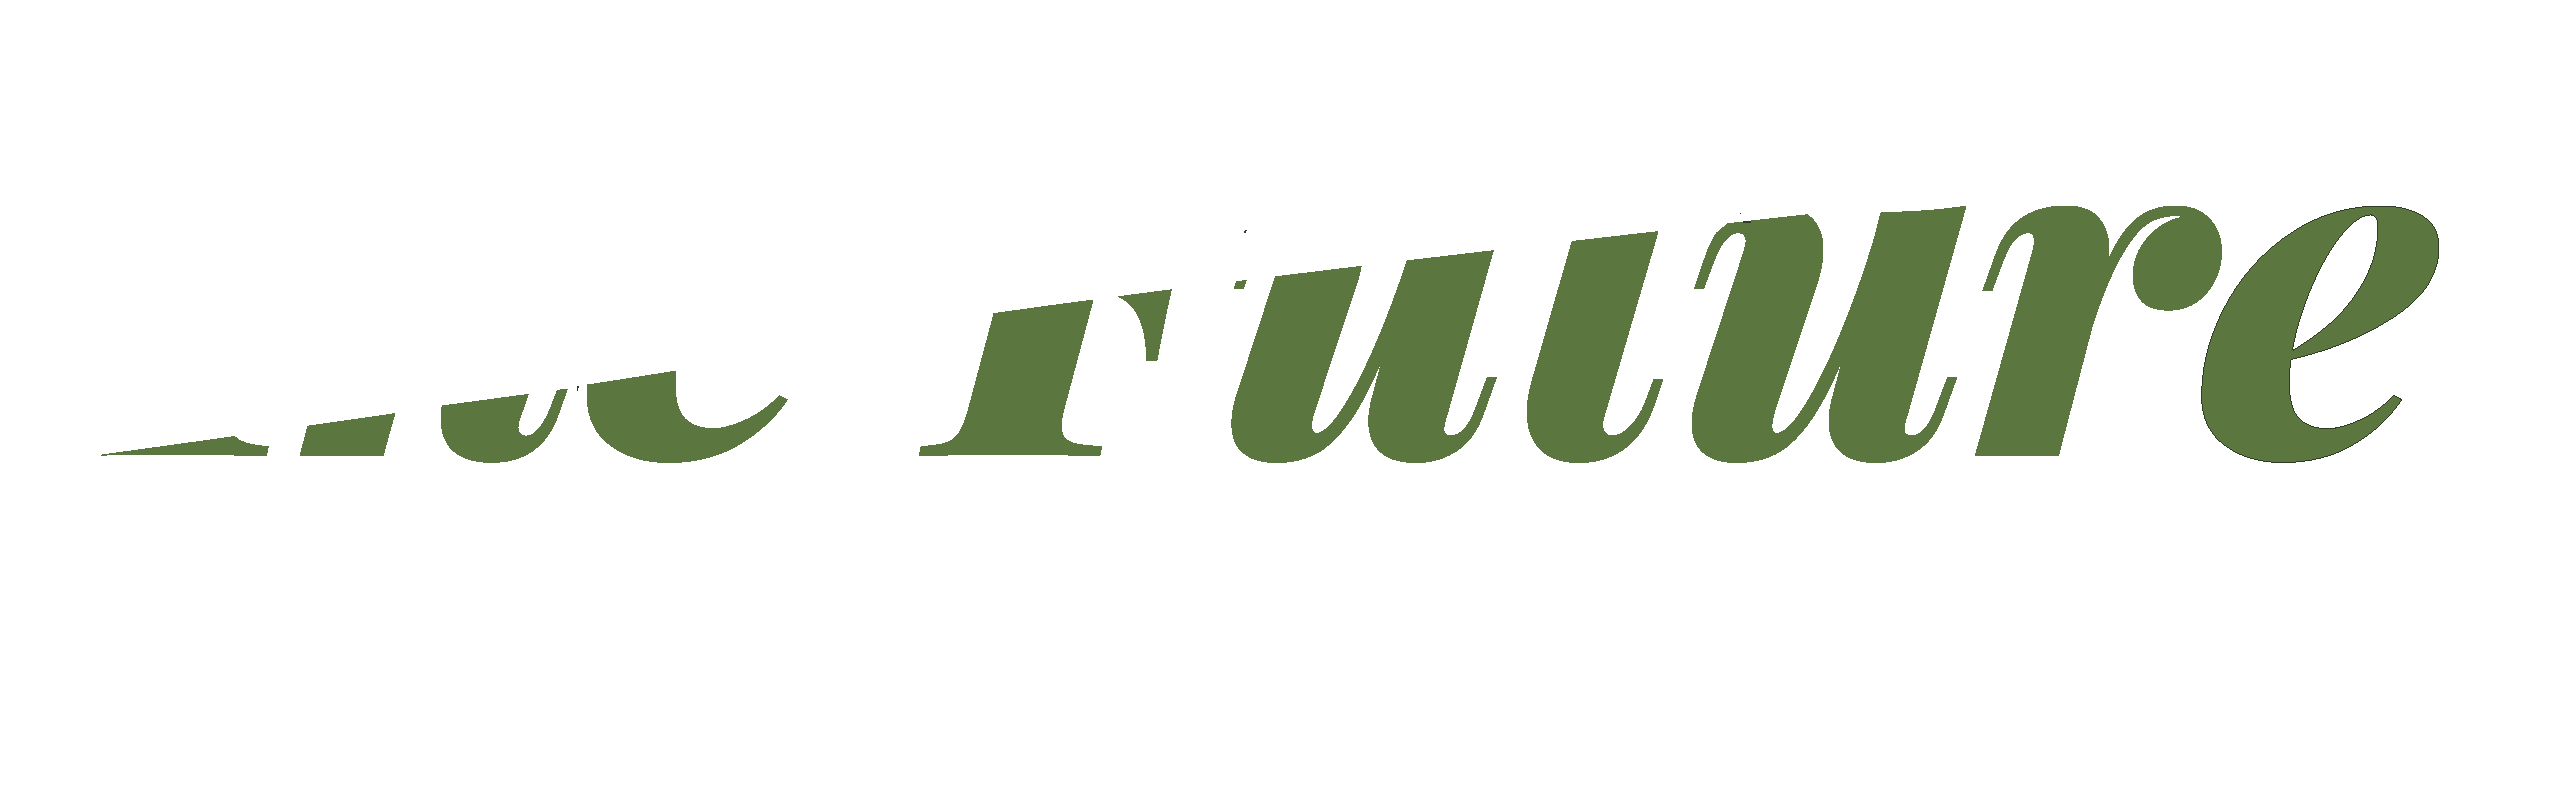 The Future is Green